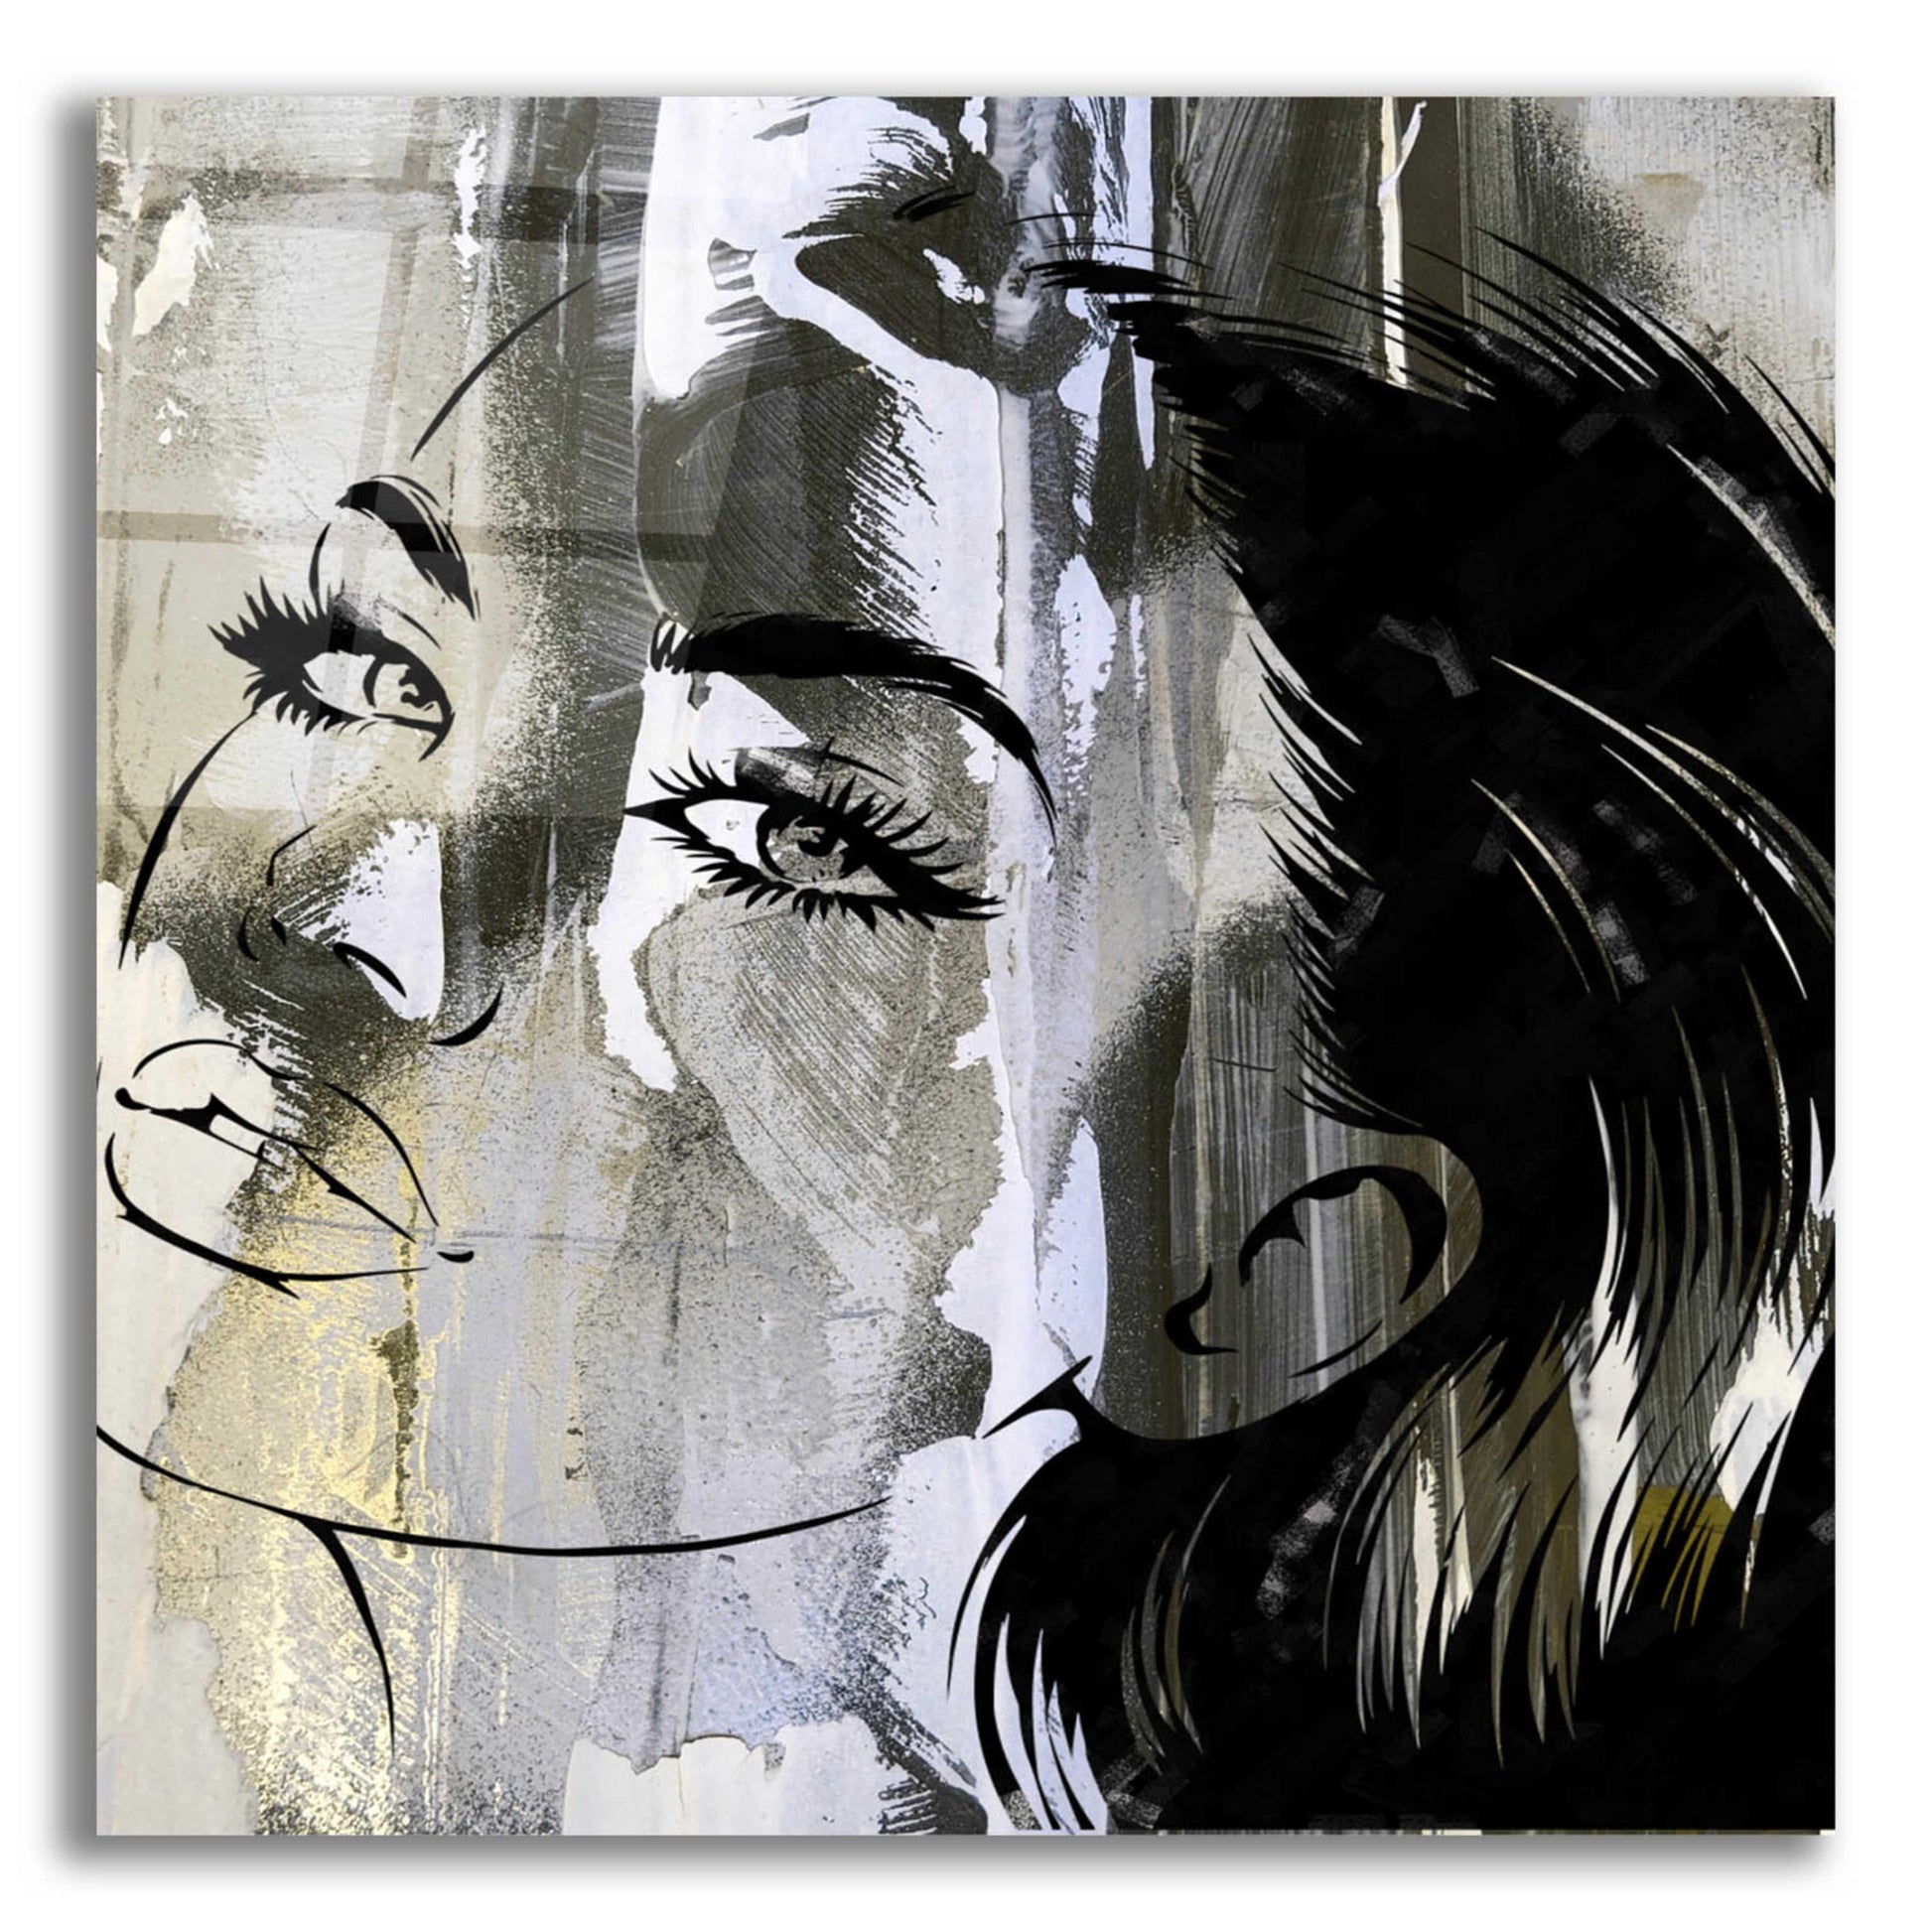 Epic Art 'Face In The Wall 2' by Karen Smith Acrylic Glass Wall Art